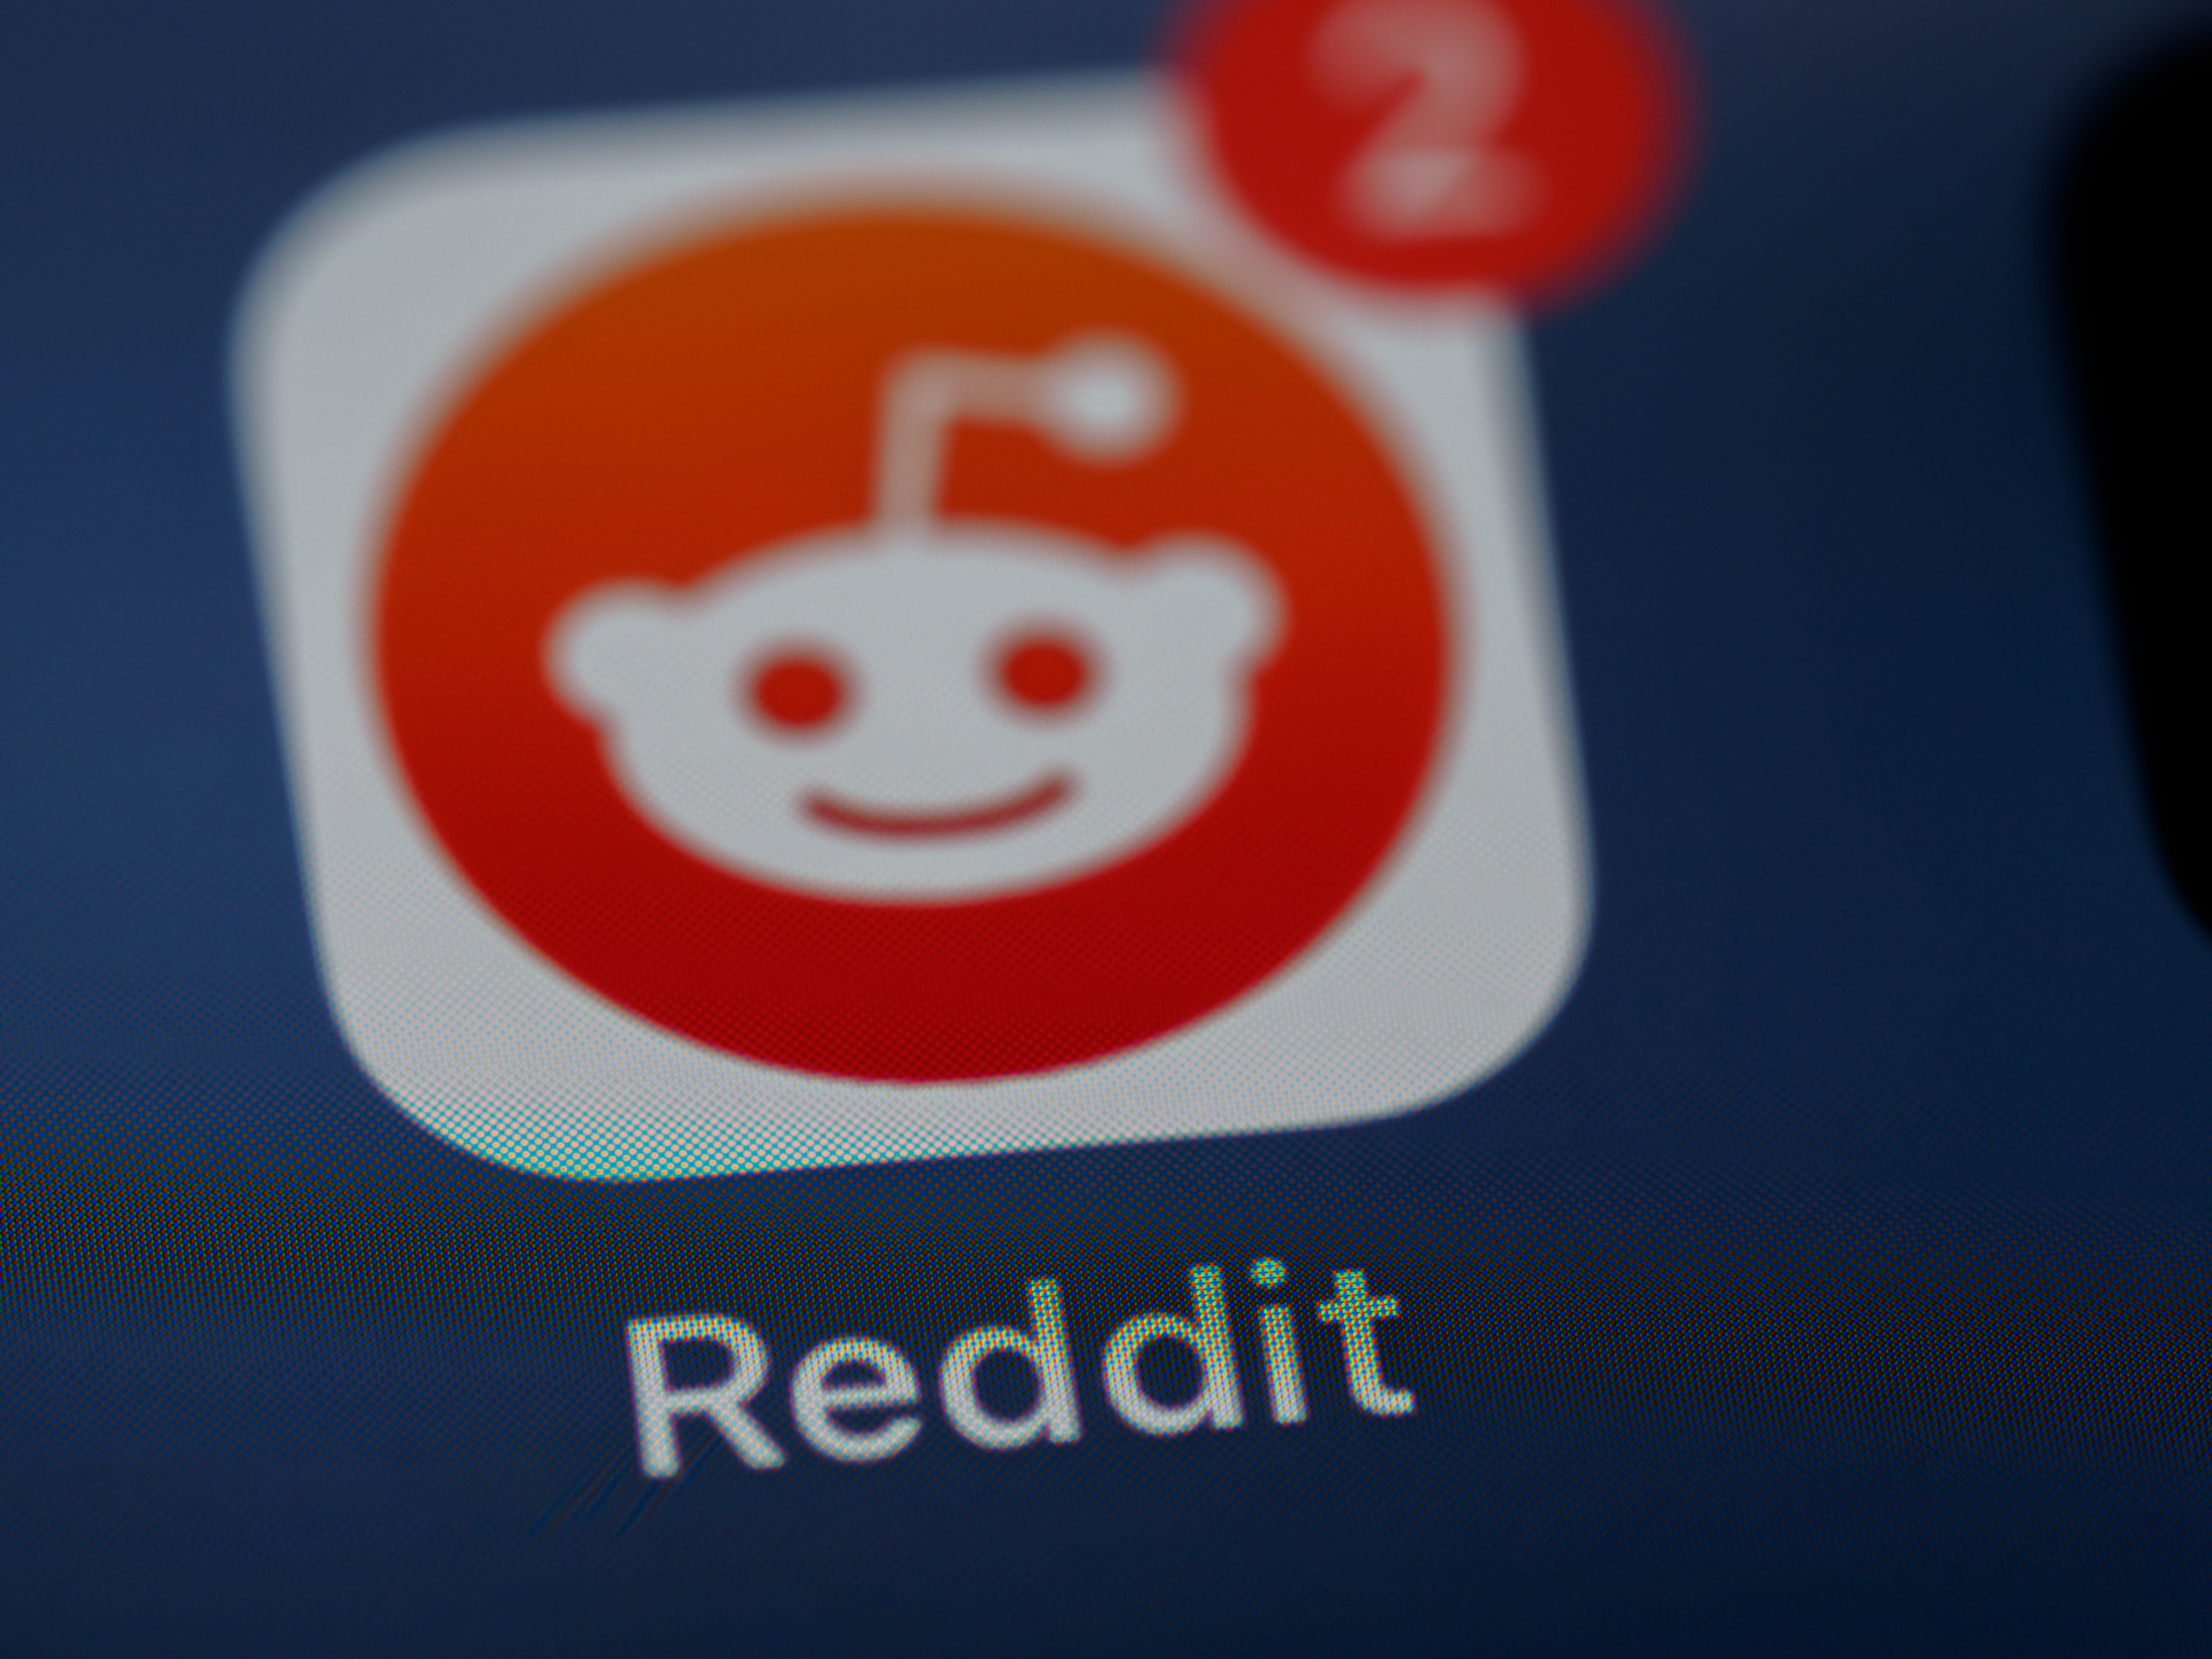 The Ultimate Guide to Advertising on Reddit